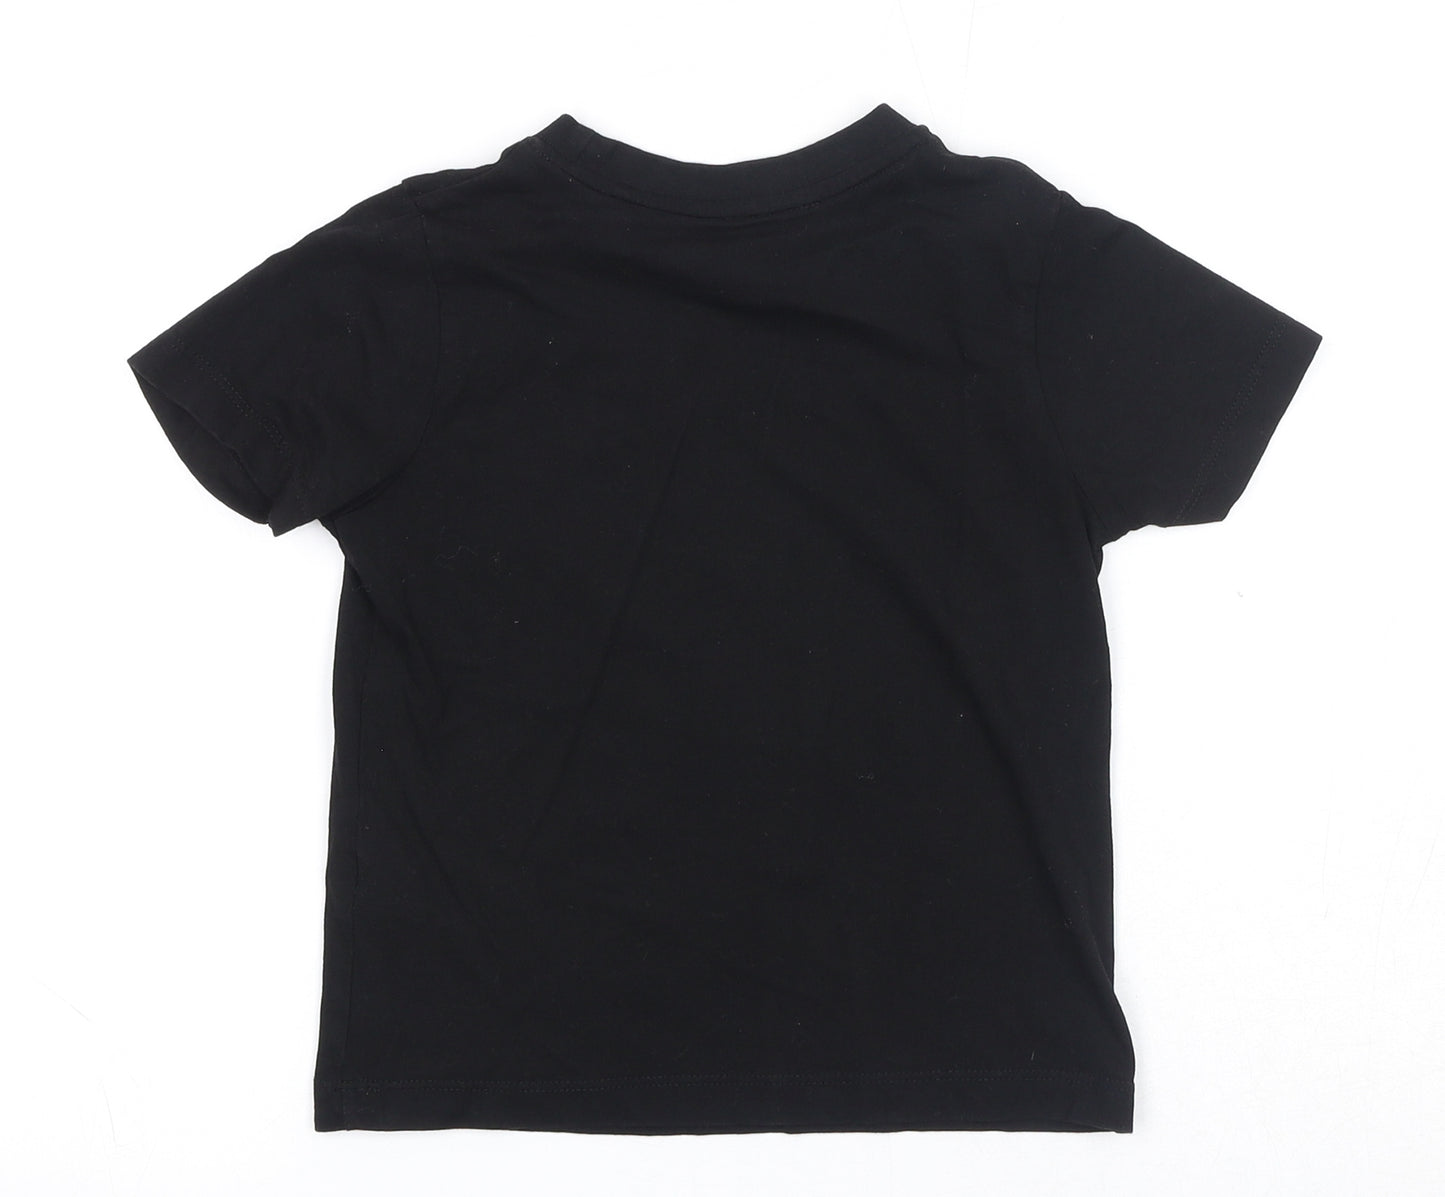 Hullabaloo Boys Black Cotton Basic T-Shirt Size 5-6 Years Round Neck Pullover - Total Legend